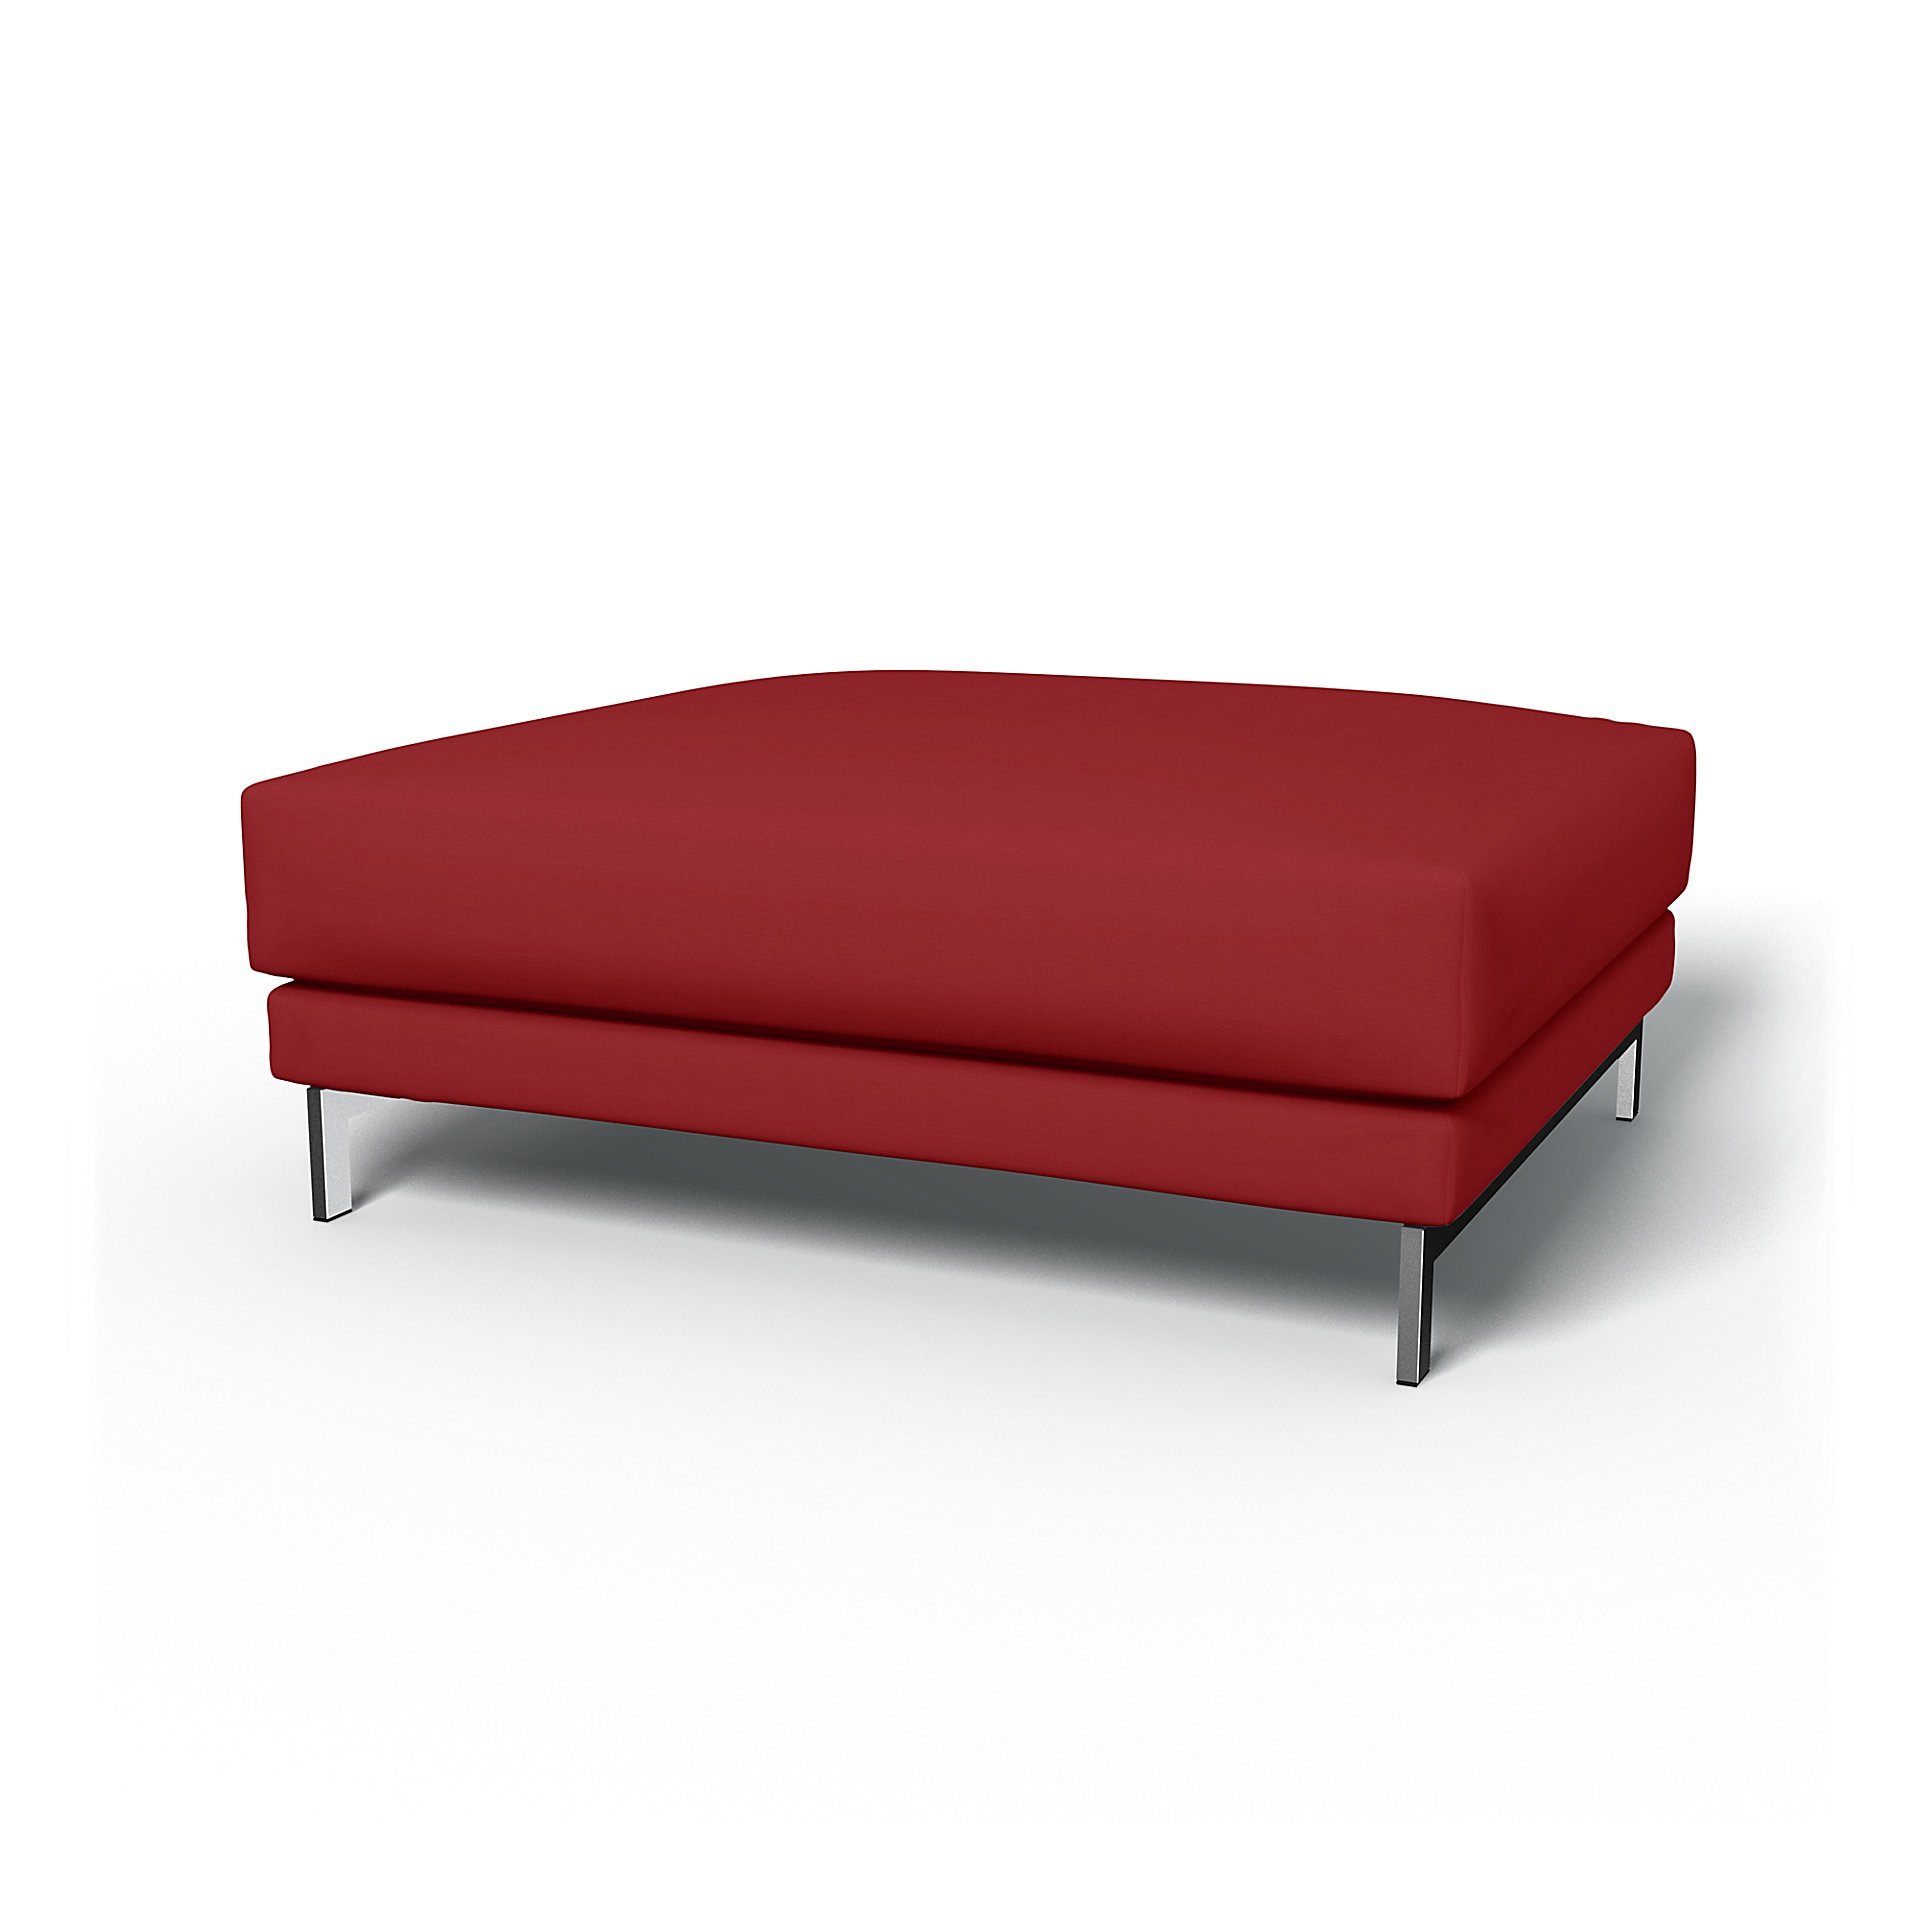 IKEA - Nockeby Footstool Cover, Scarlet Red, Cotton - Bemz